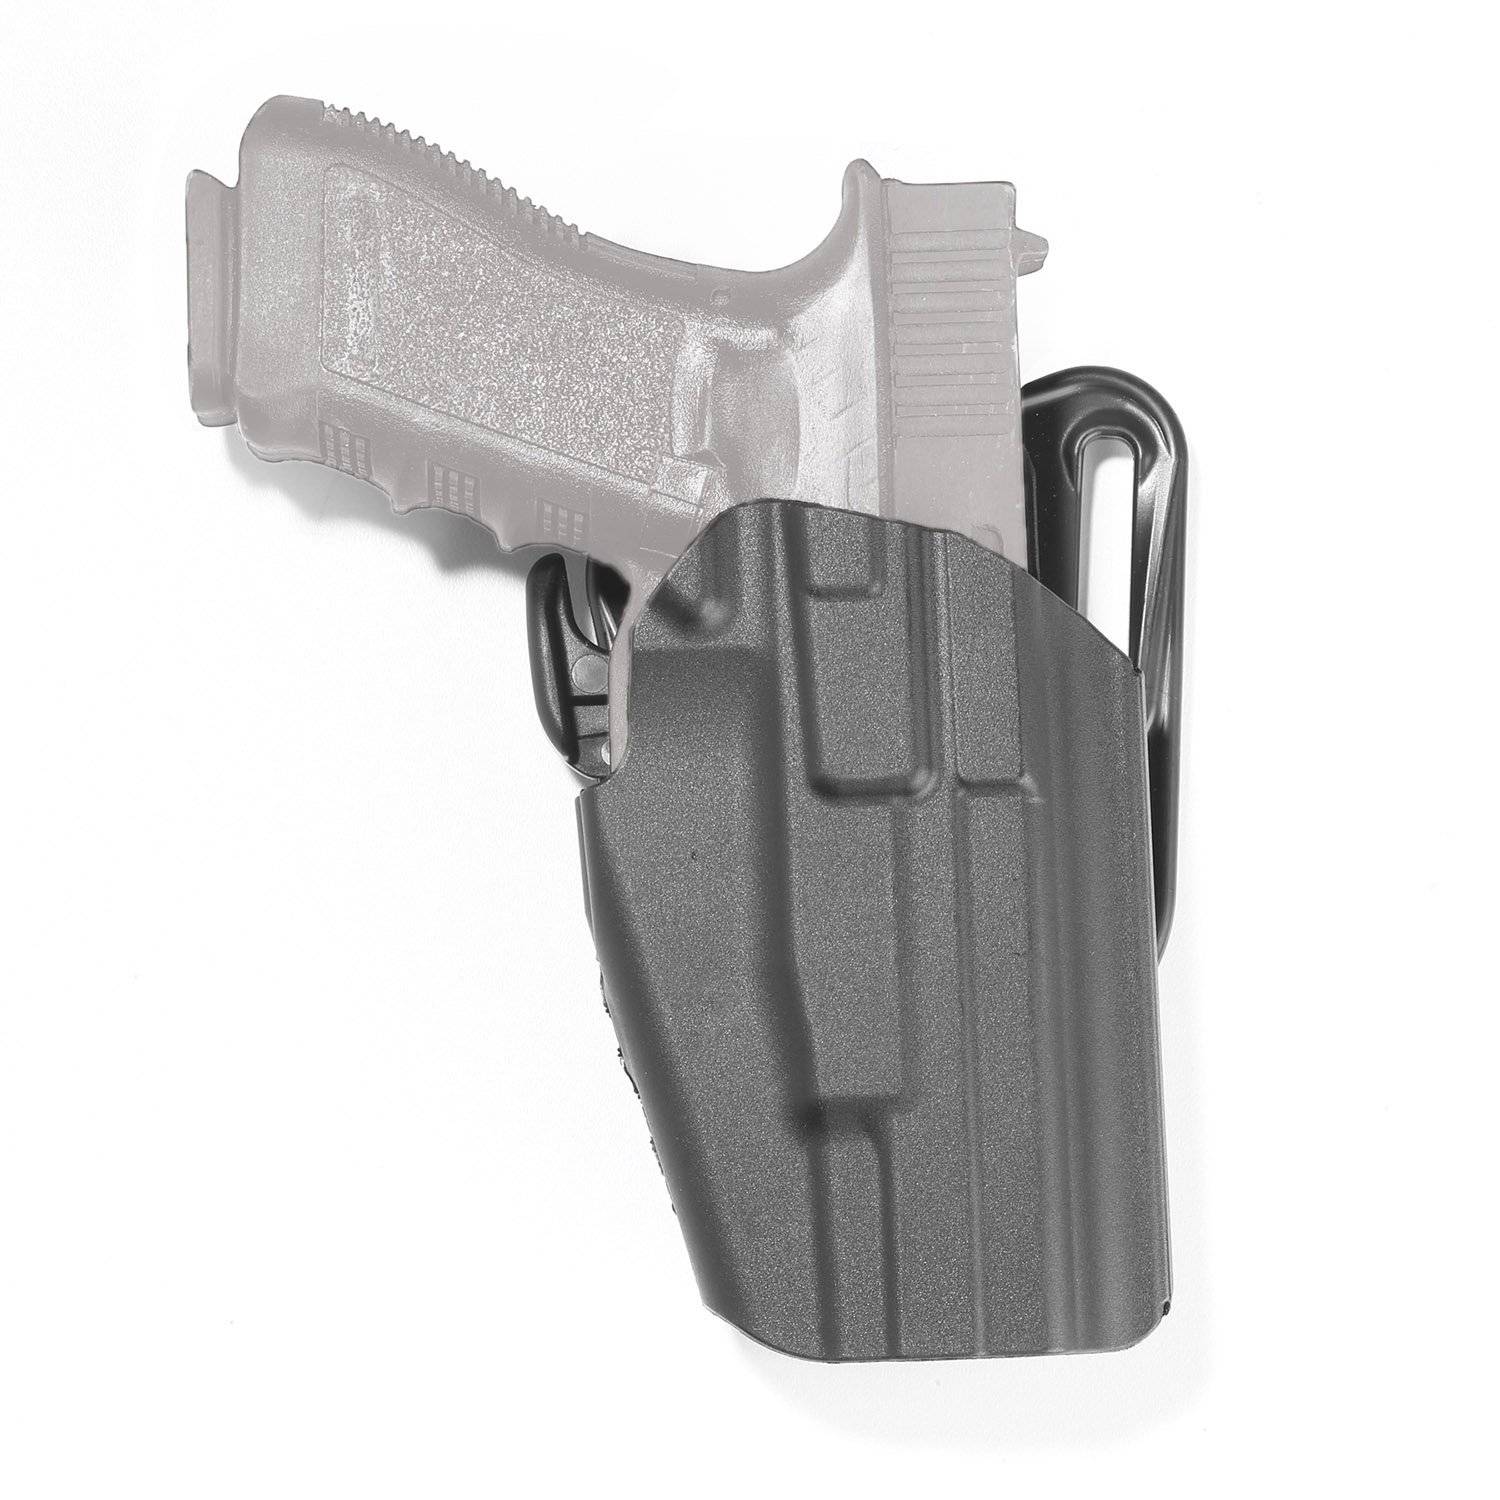 Safariland 578 GLS Pro-Fit Concealable Holster